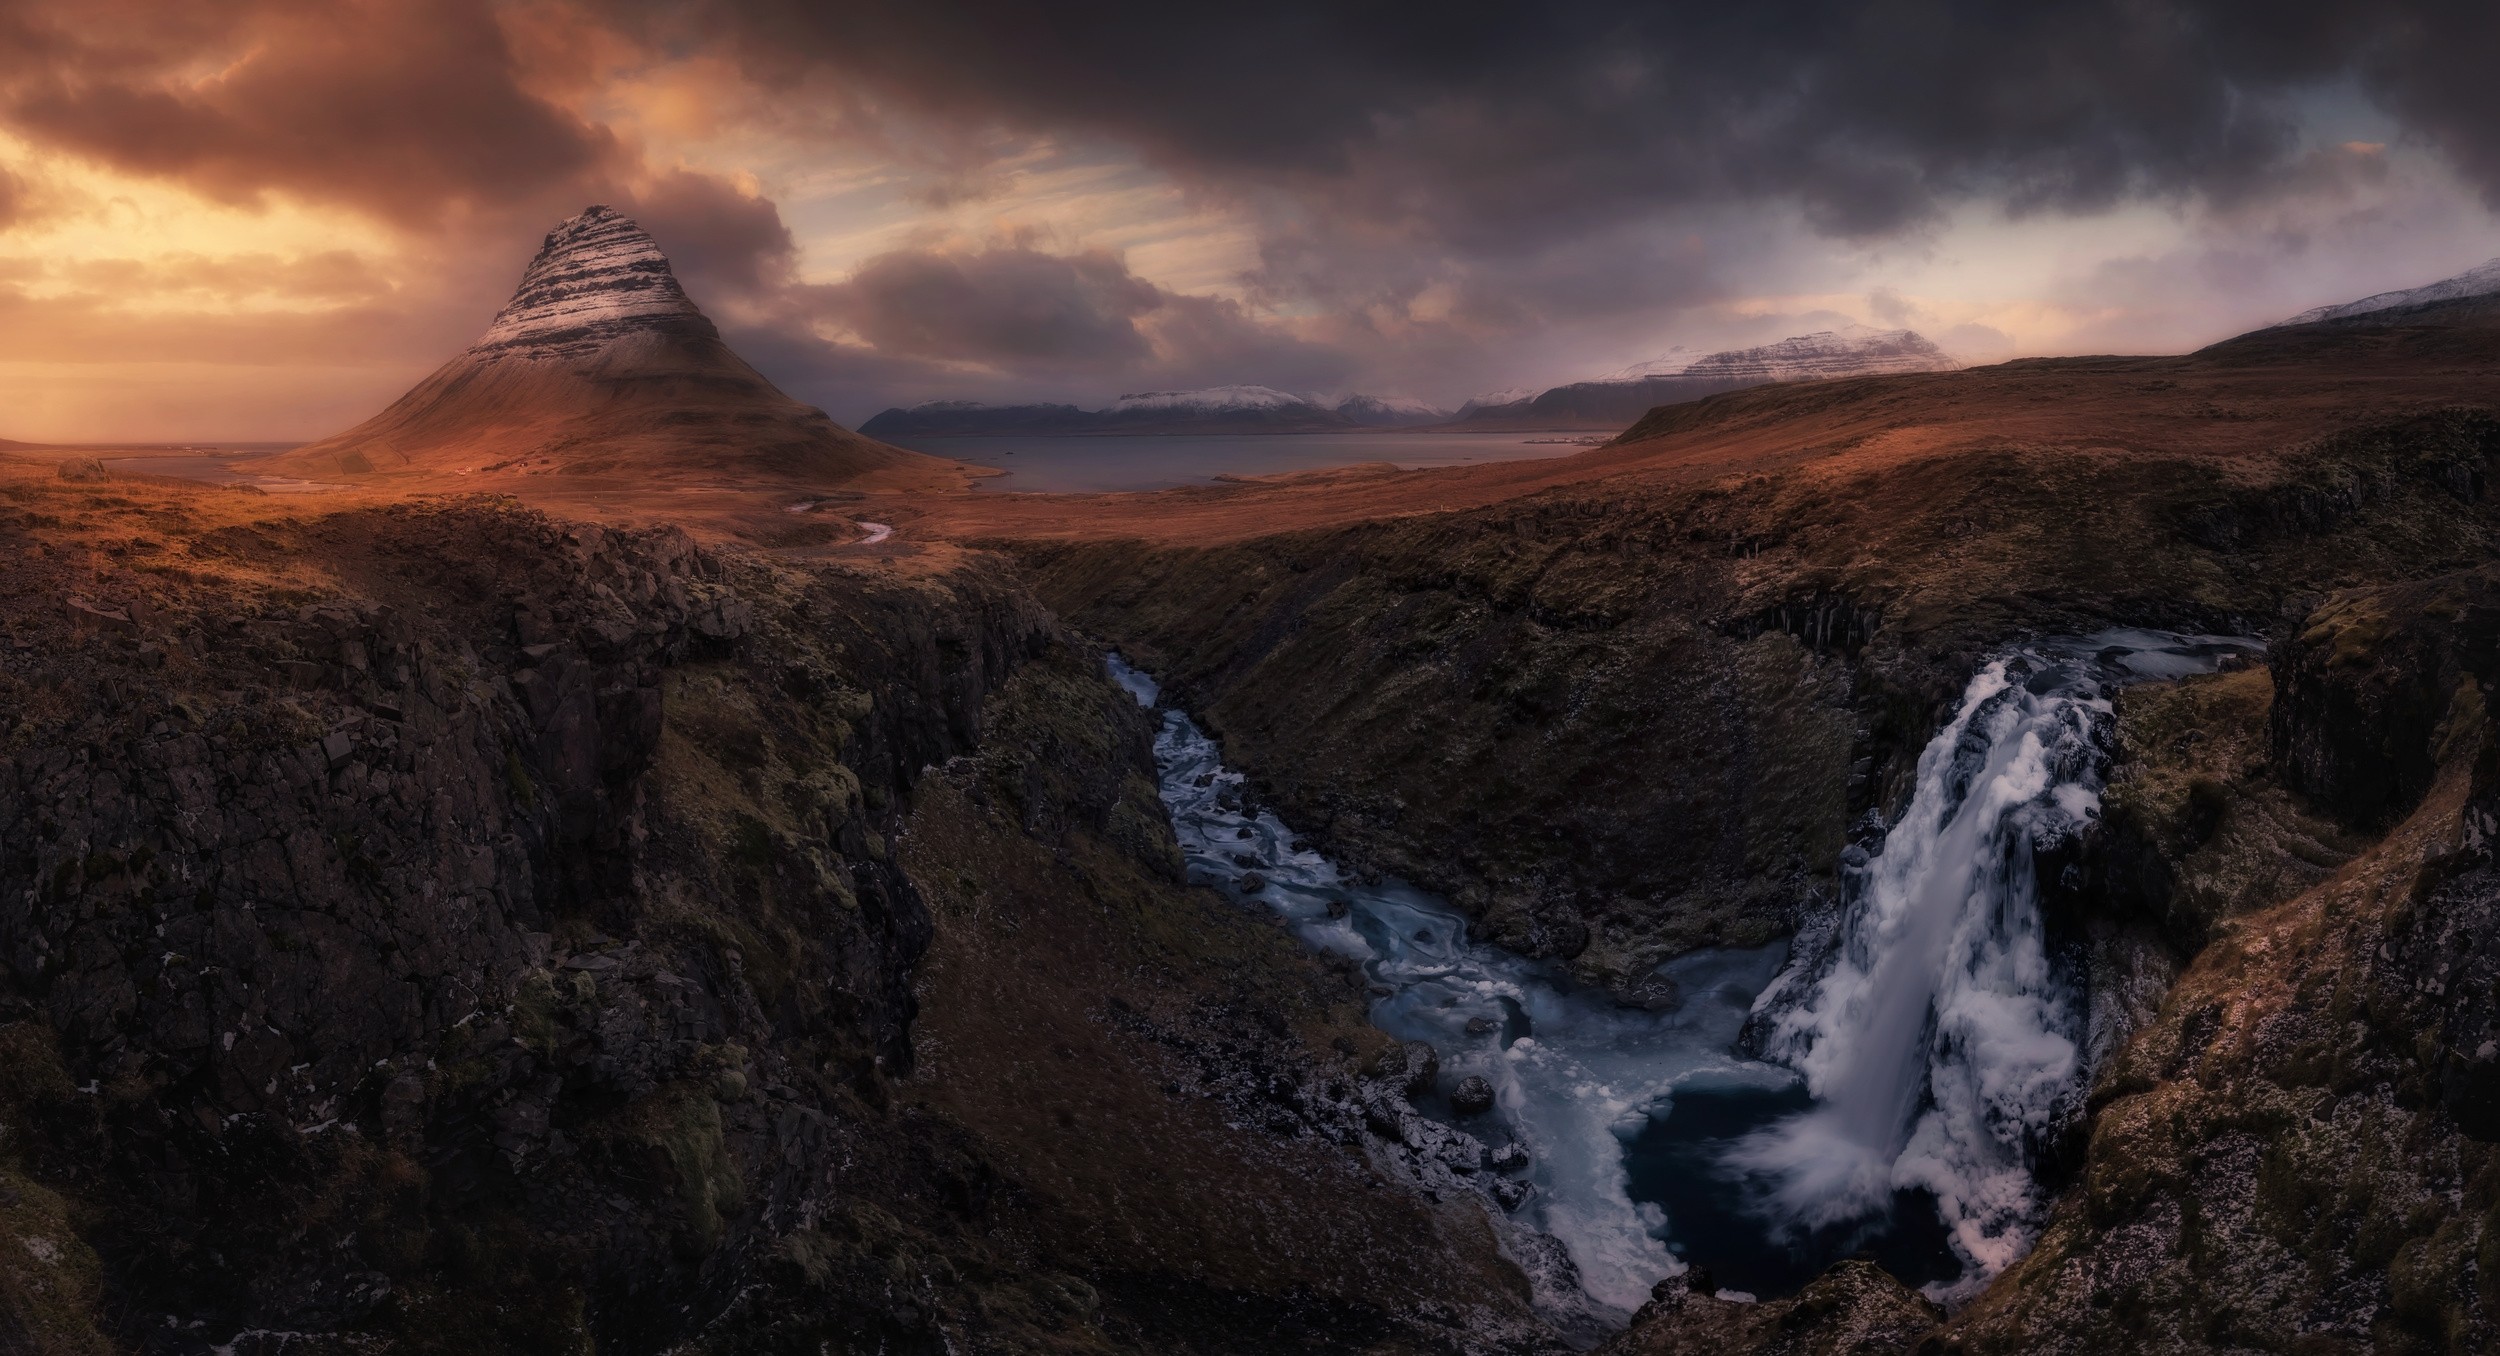 General 2500x1356 nature photography landscape mountains sunset waterfall river clouds road snowy peak Iceland Kirkjufell